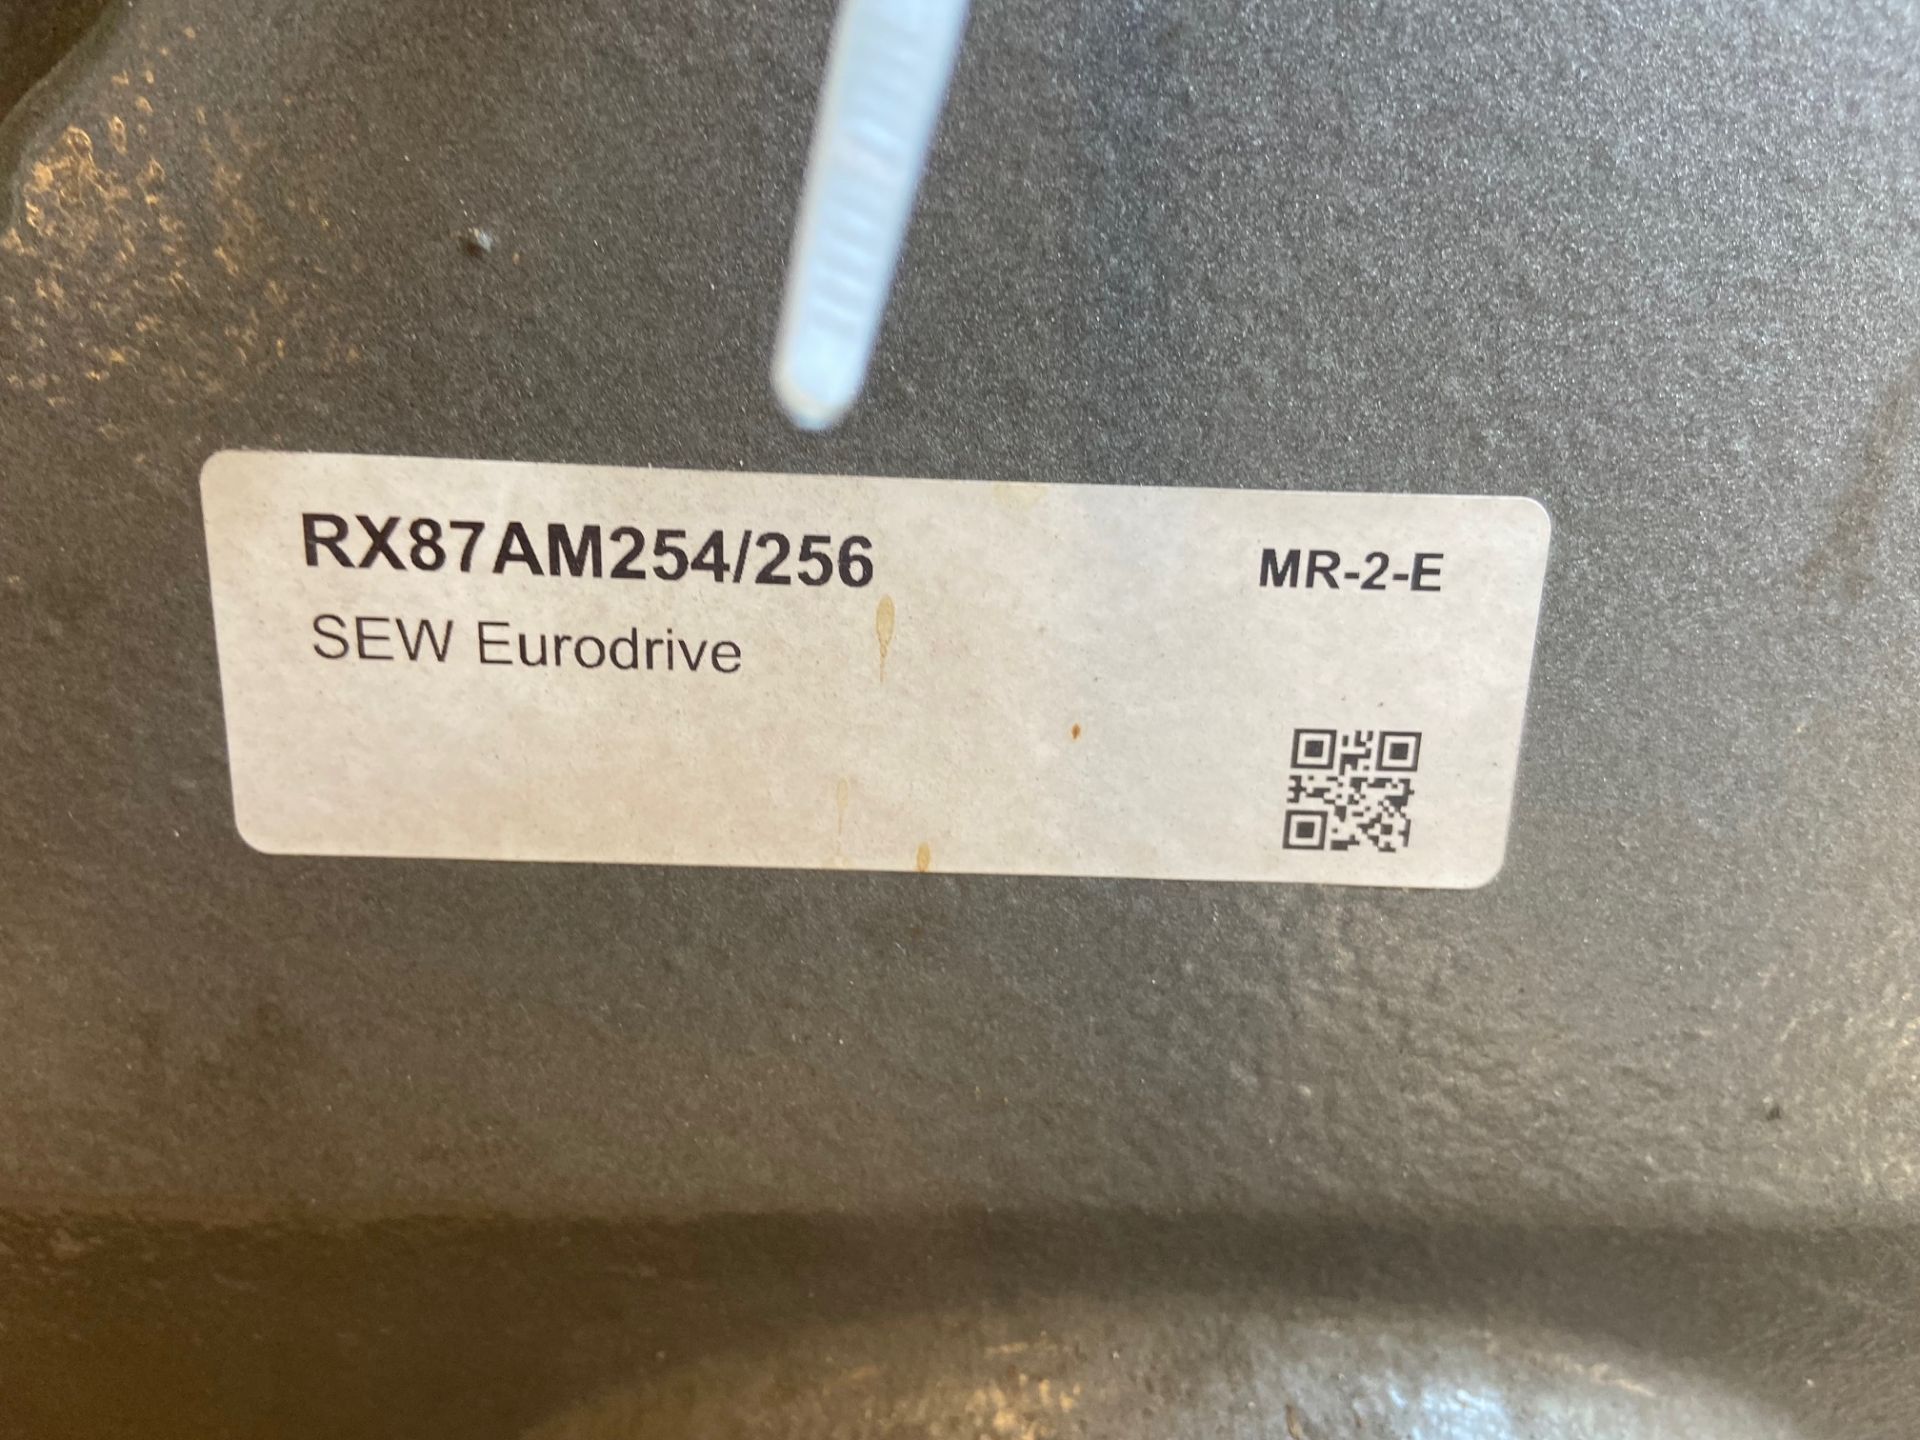 NEW SEW EURODRIVE GEAR DRIVE FOR AXIFLOW ST   90 PUMP, TYPE RX 87AM254/256, INPUT 1750, OUTPUT - Image 5 of 6